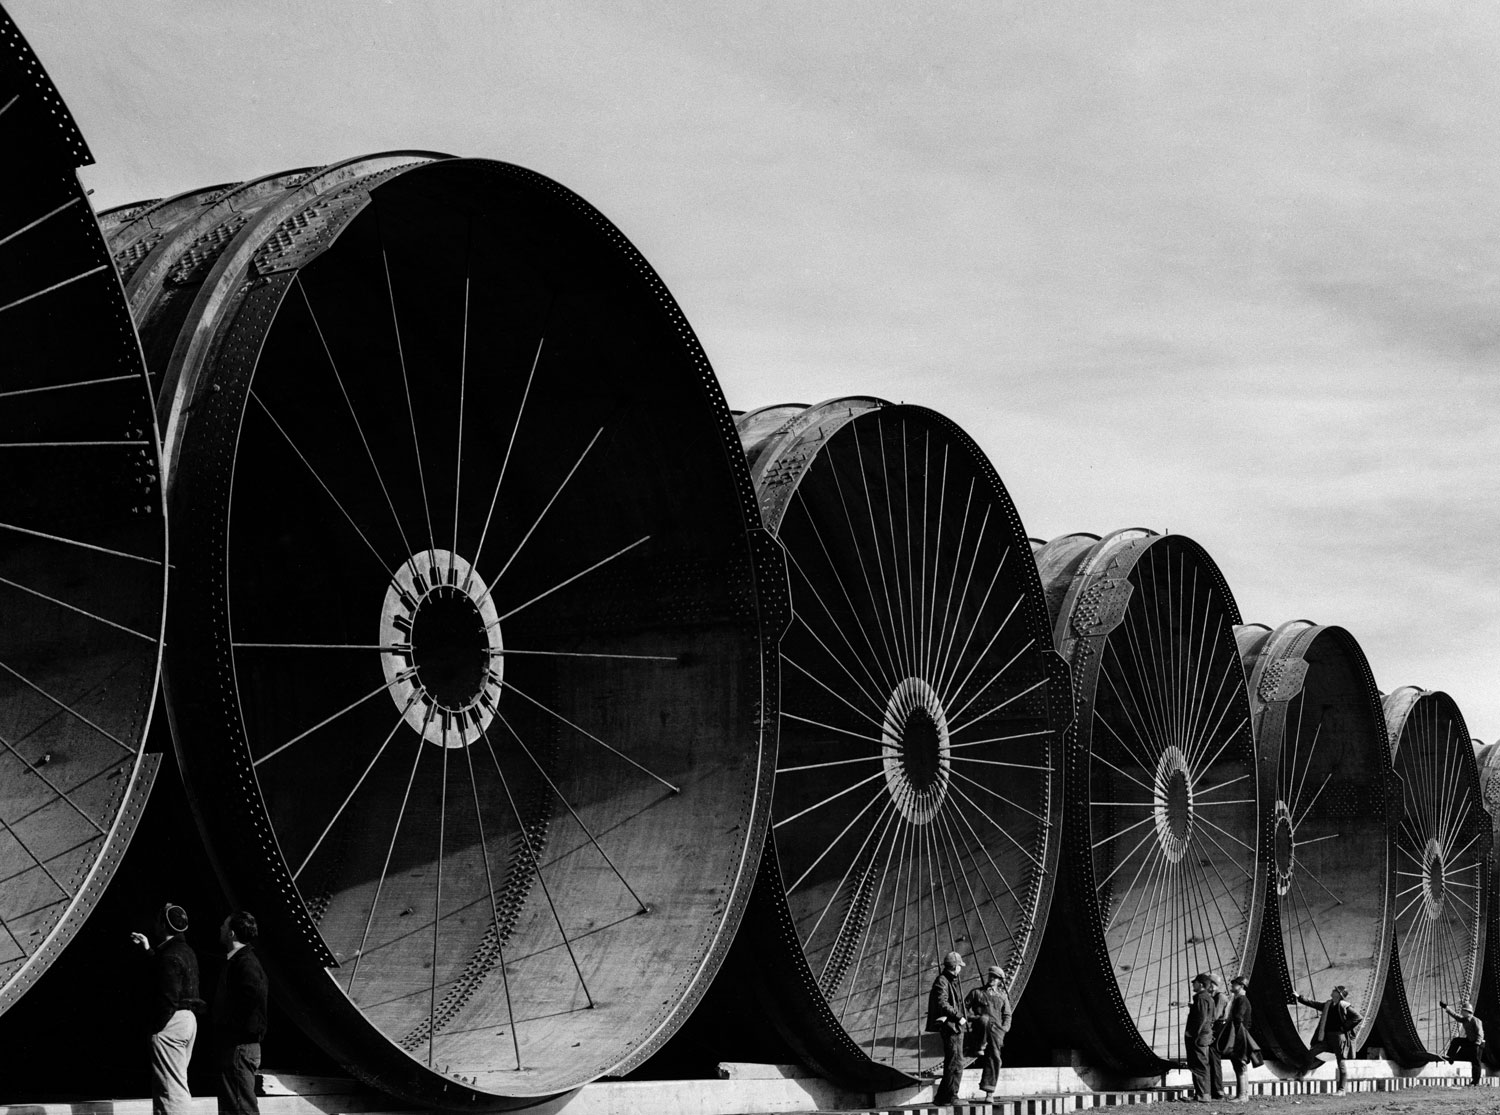 Workmen stand beside giganic pipe segments designed to divert a section on the Missouri River during the construction of Montana's Fort Peck Dam in 1936.